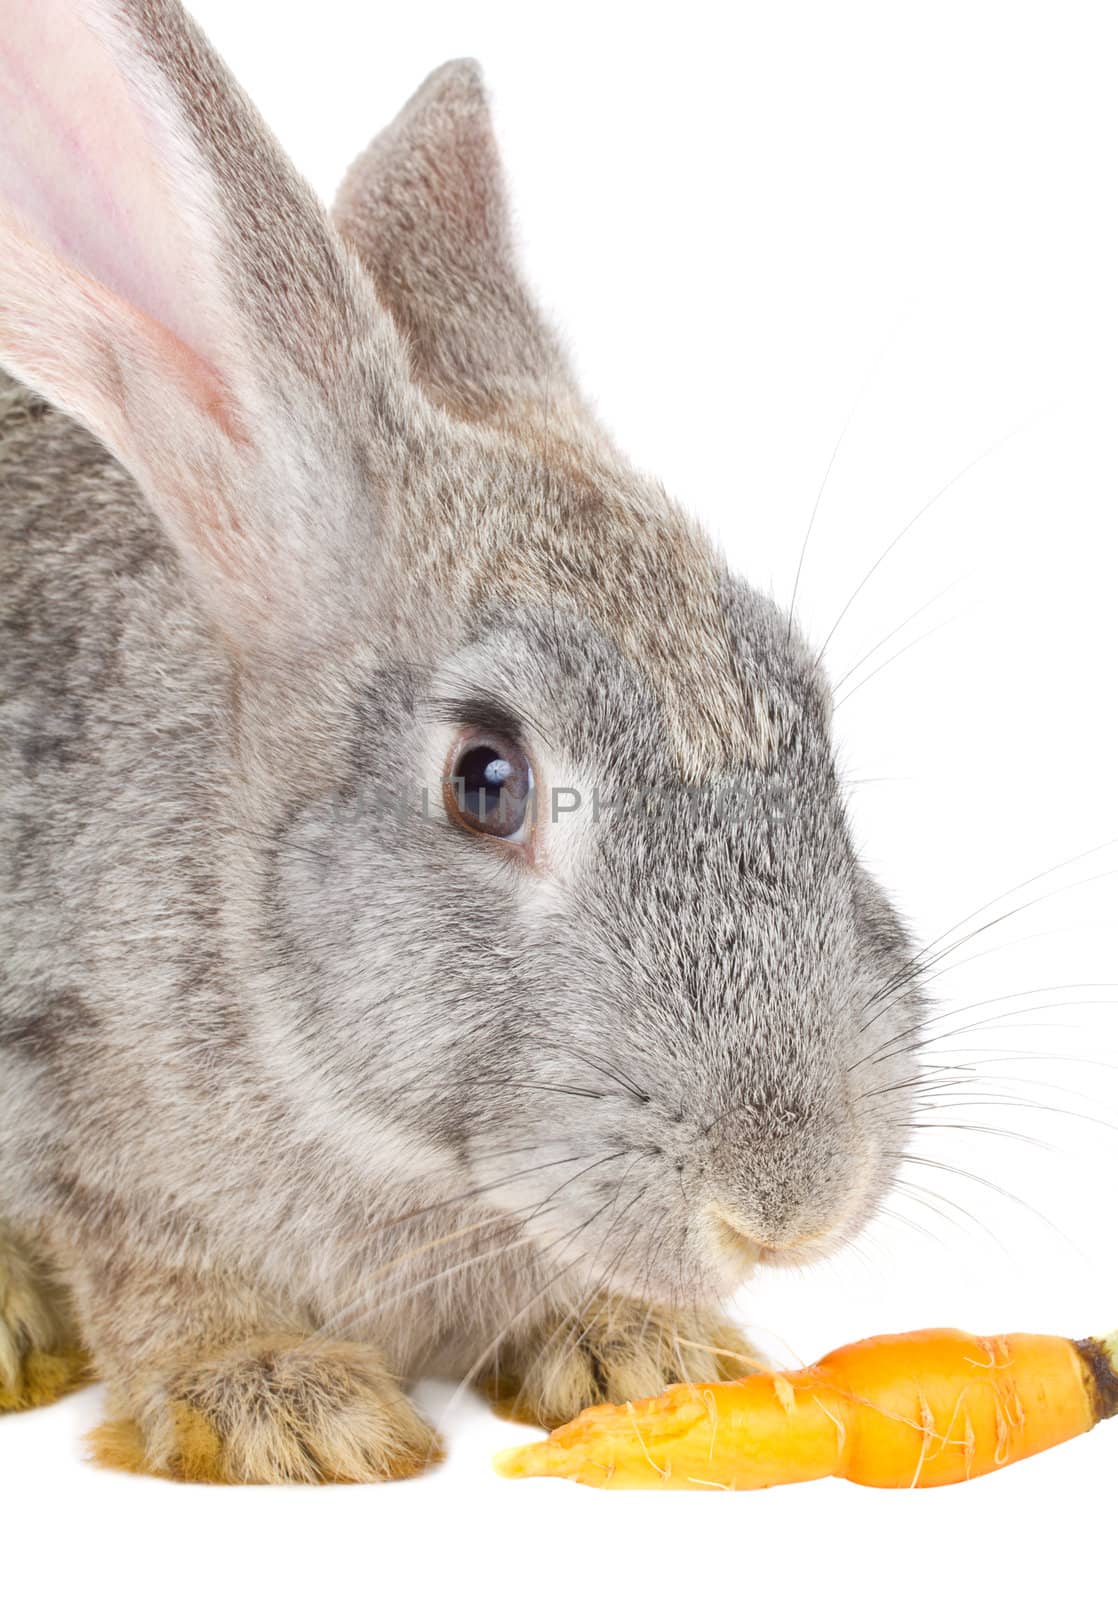 close-up rabbit eating carrot, isolated on white